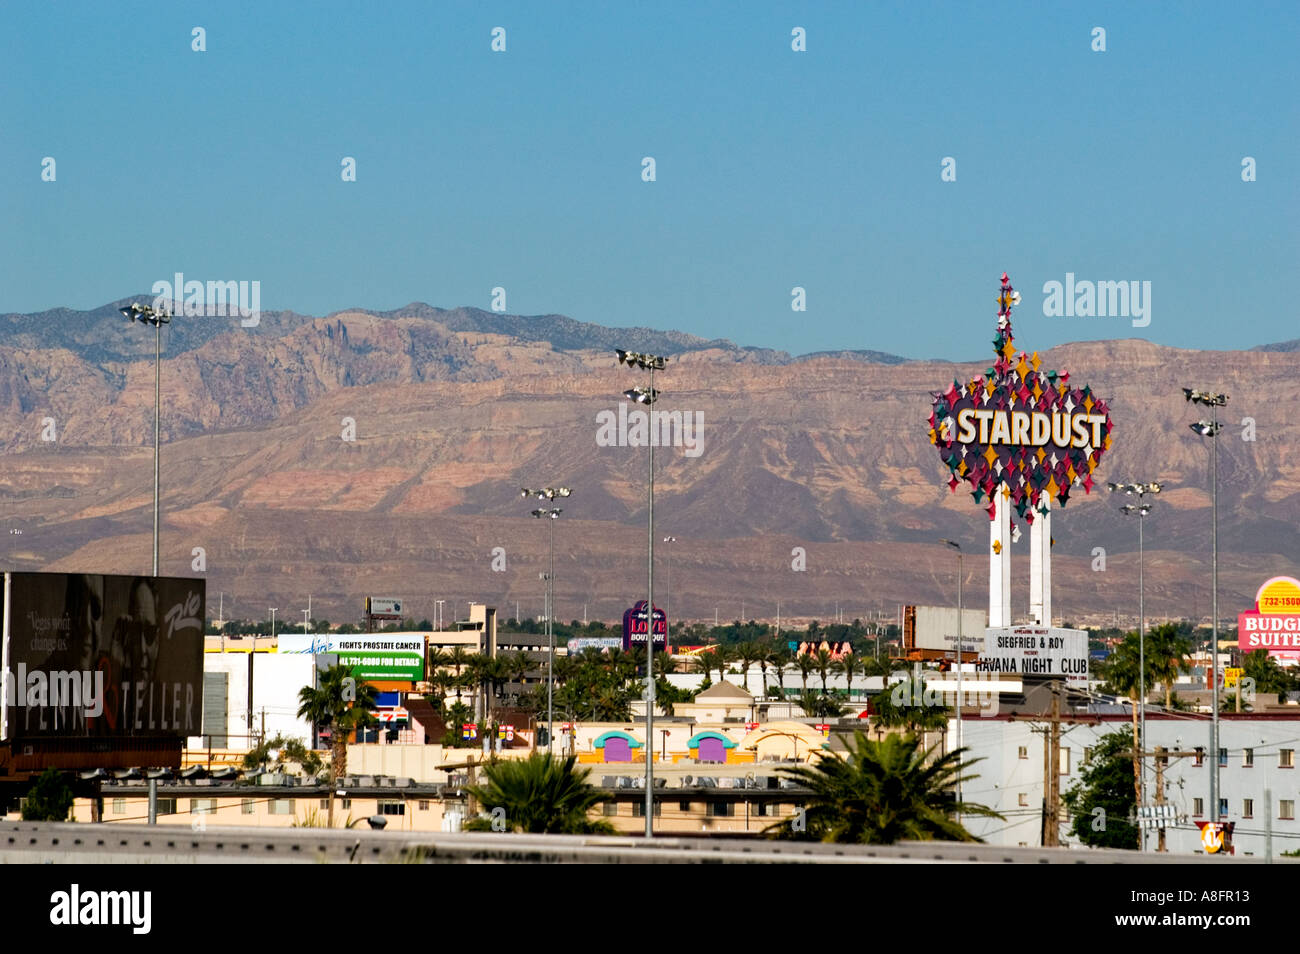 Stardust Casino Las Vegas High Resolution Stock Photography and Images -  Alamy